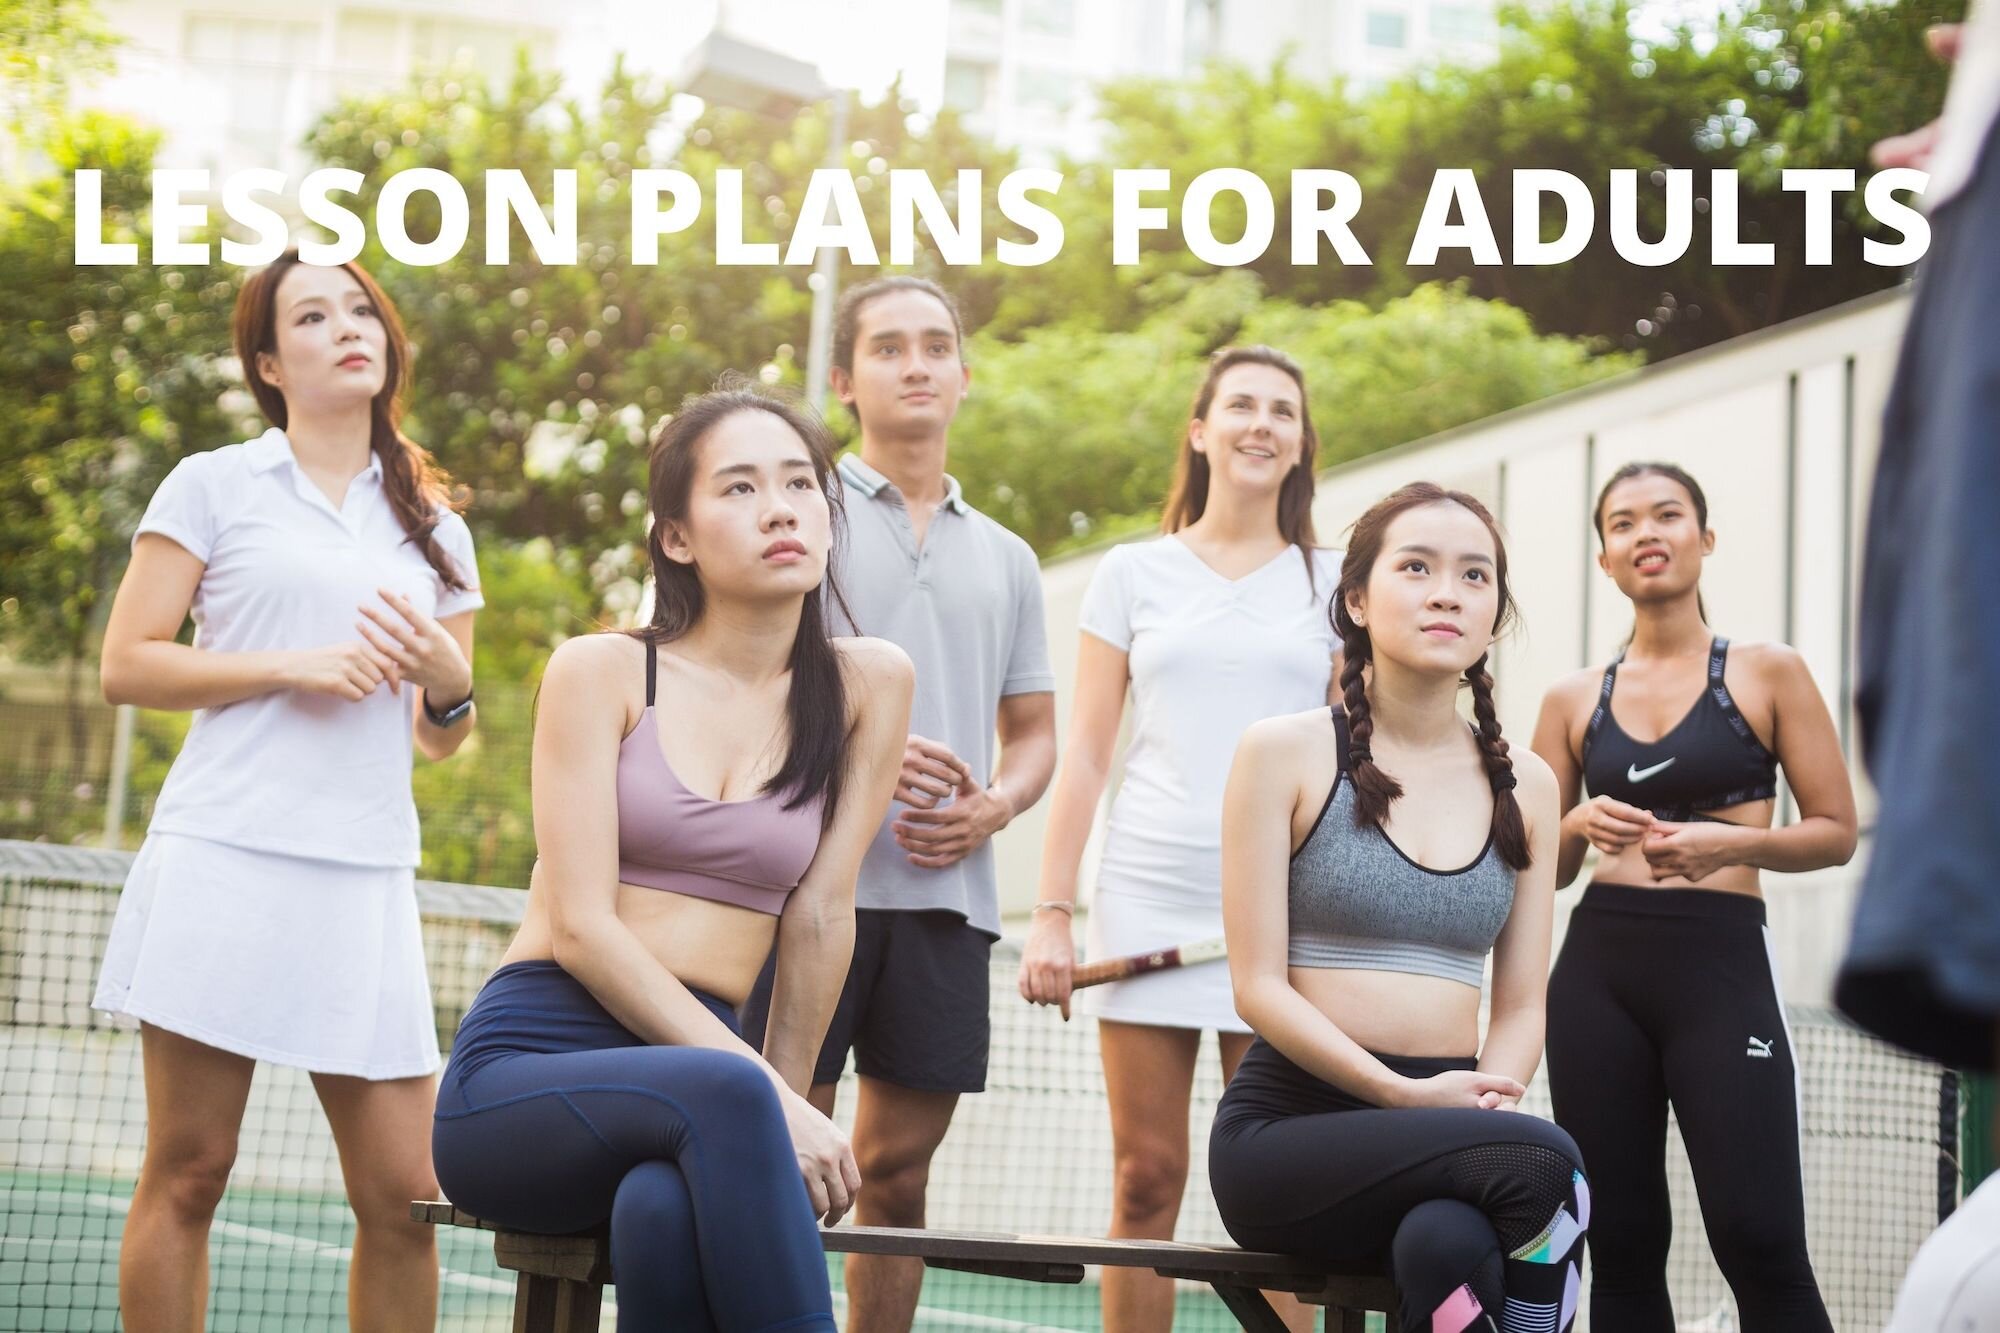 Tennis Lessons Plans Adults